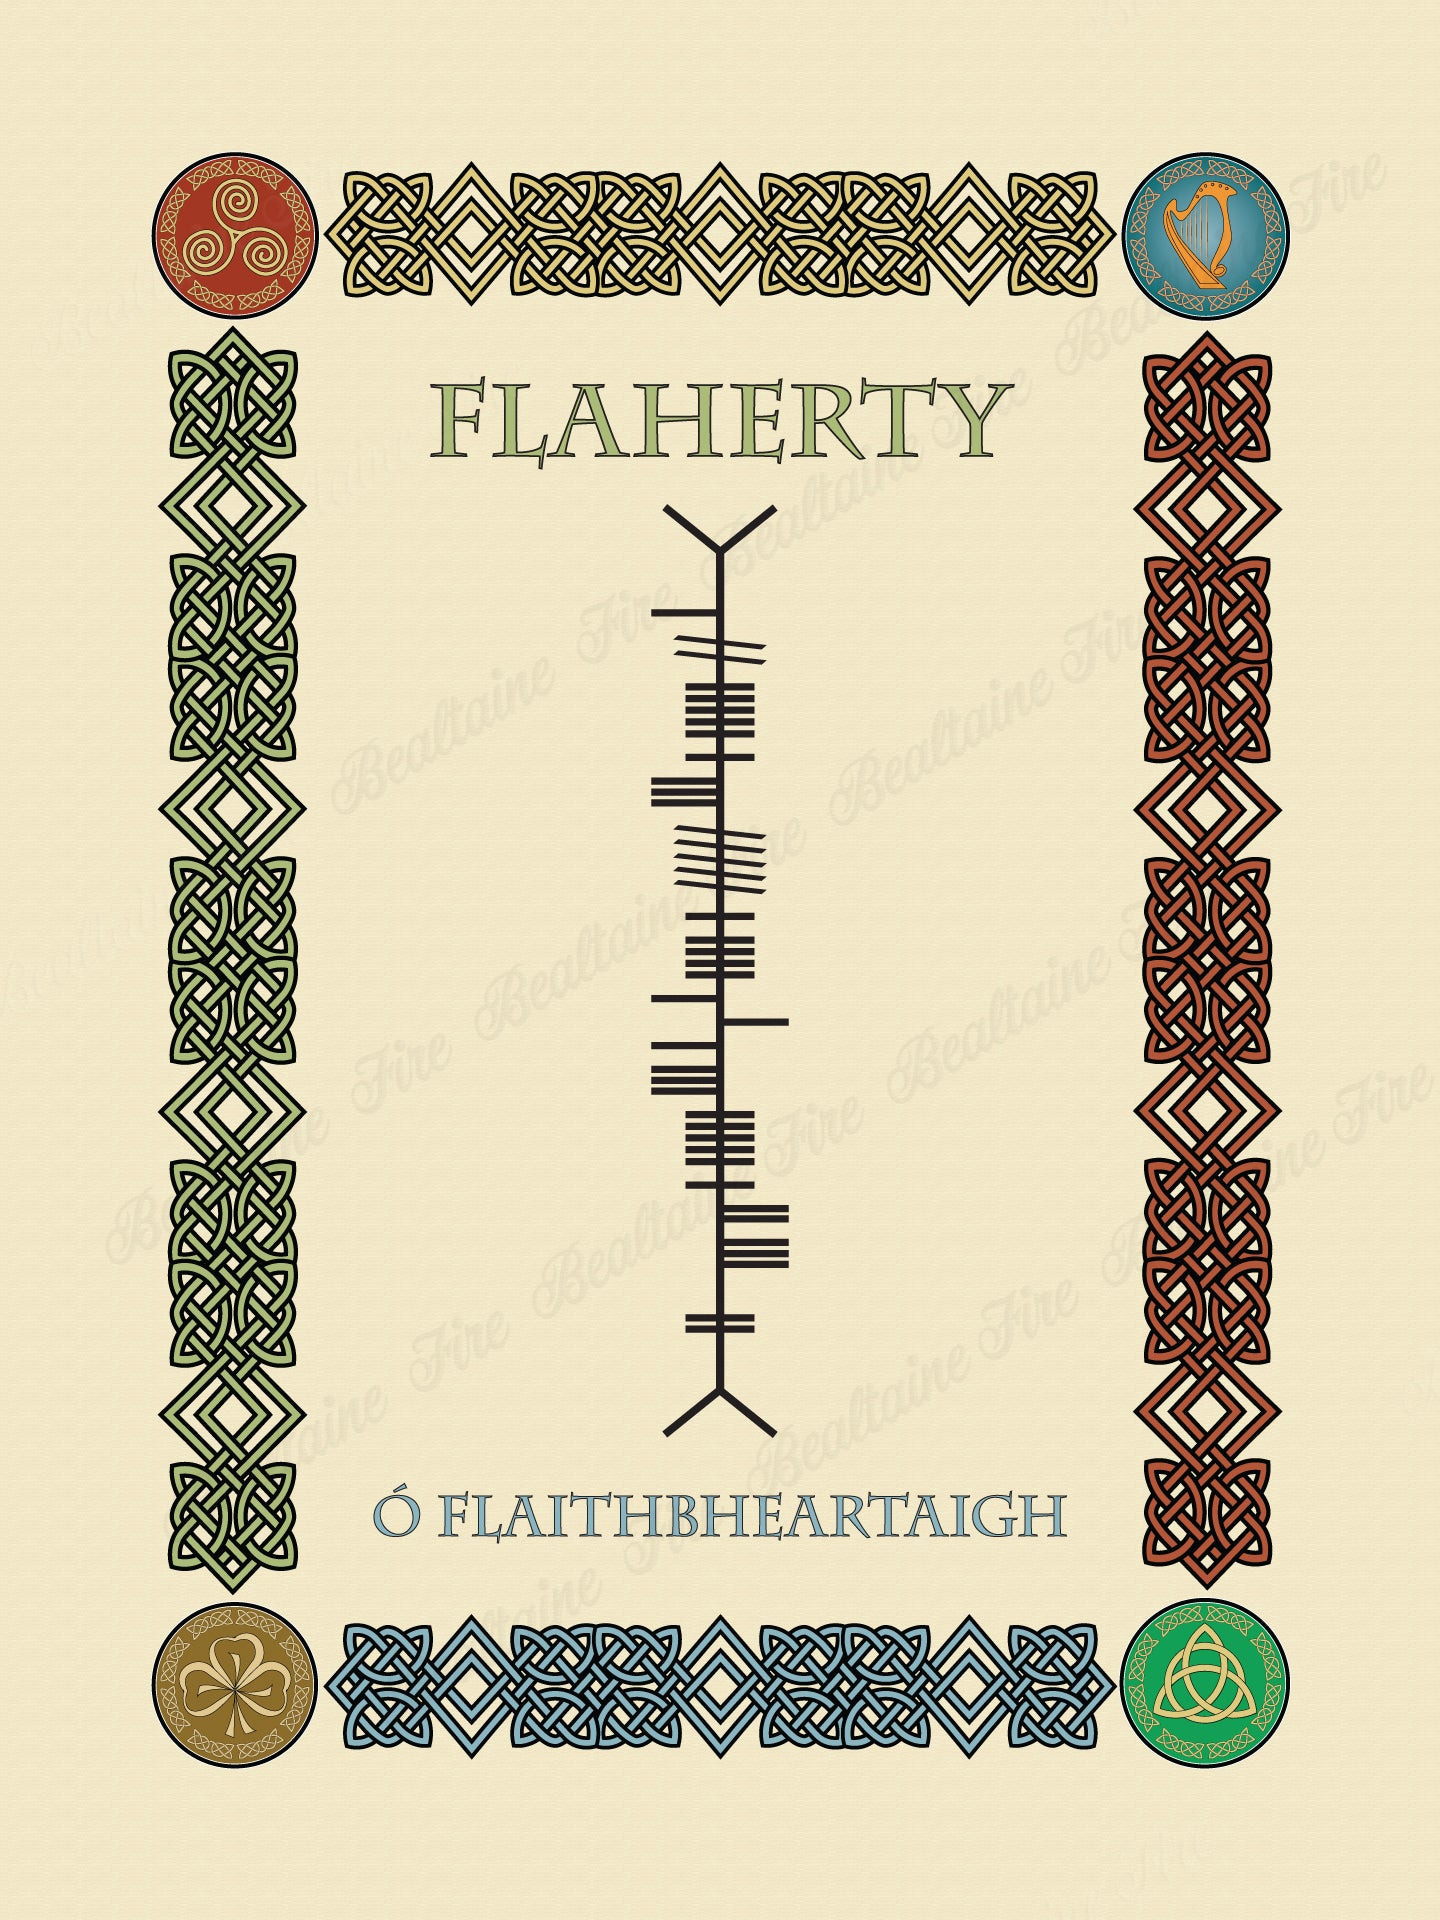 Flaherty in Old Irish and Ogham - PDF Download